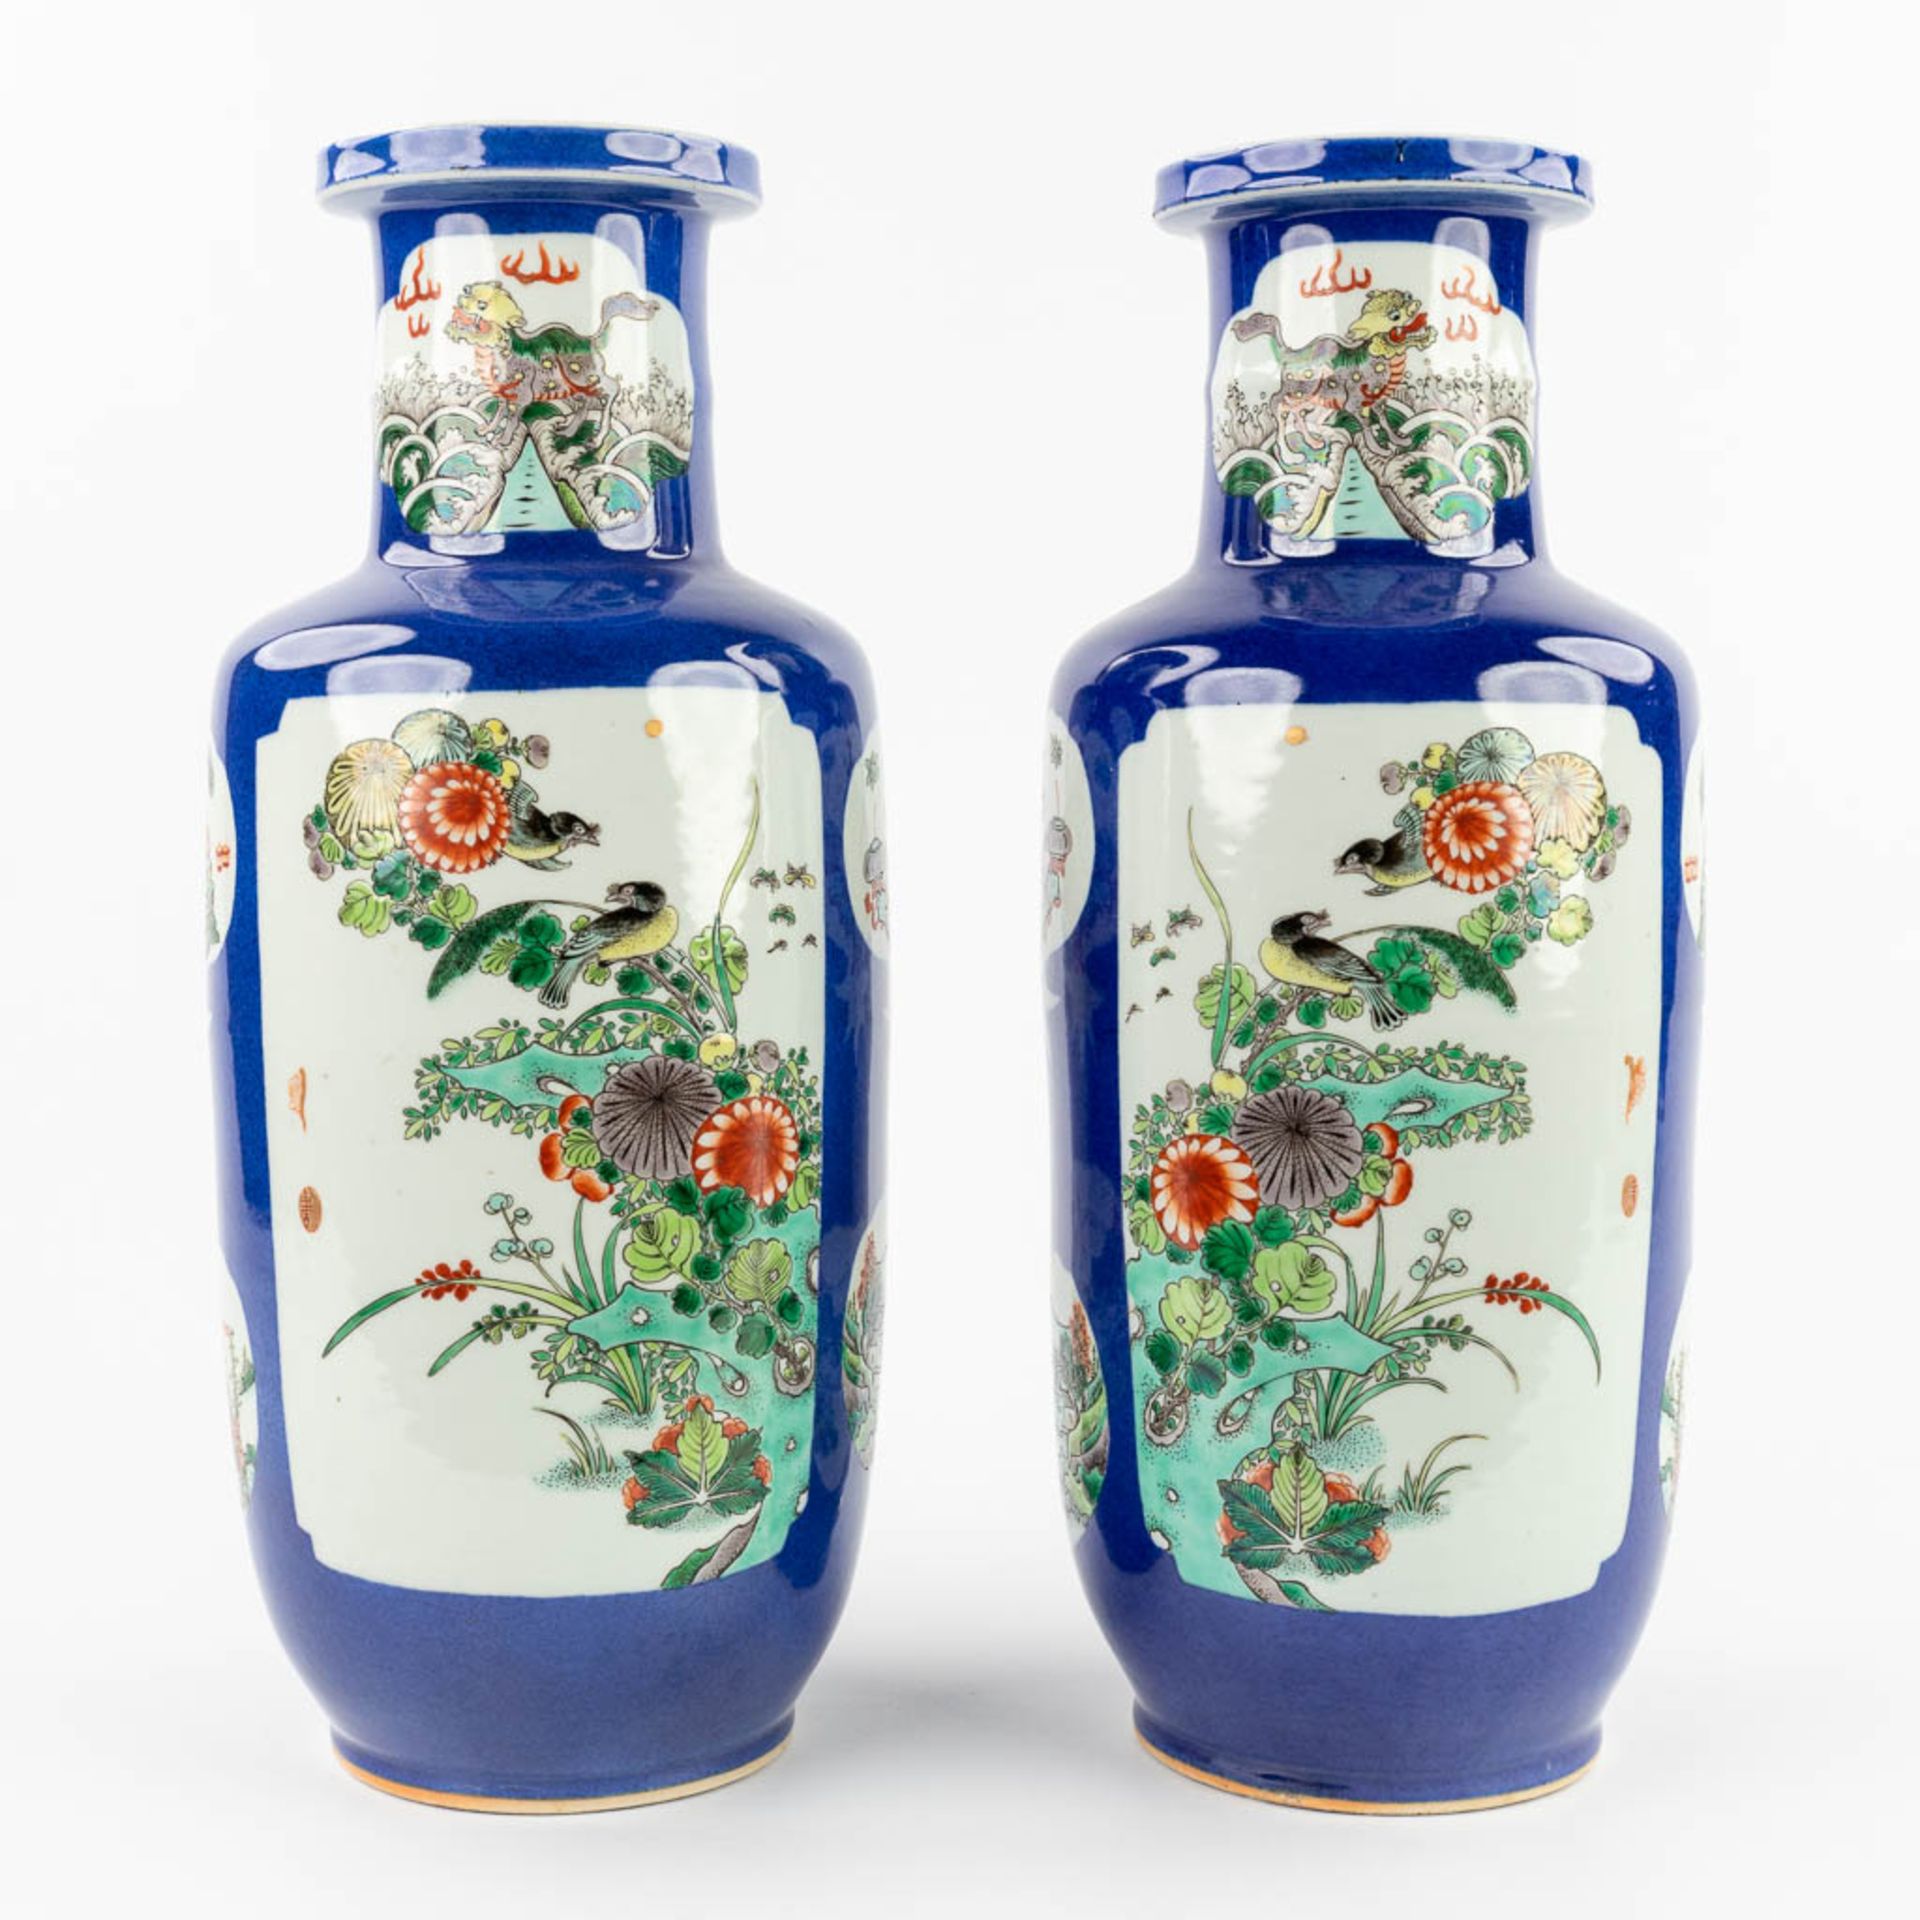 A pair of Chinese vases, decorated with fauna and flora. 20th C. (H:45 x D:18 cm)